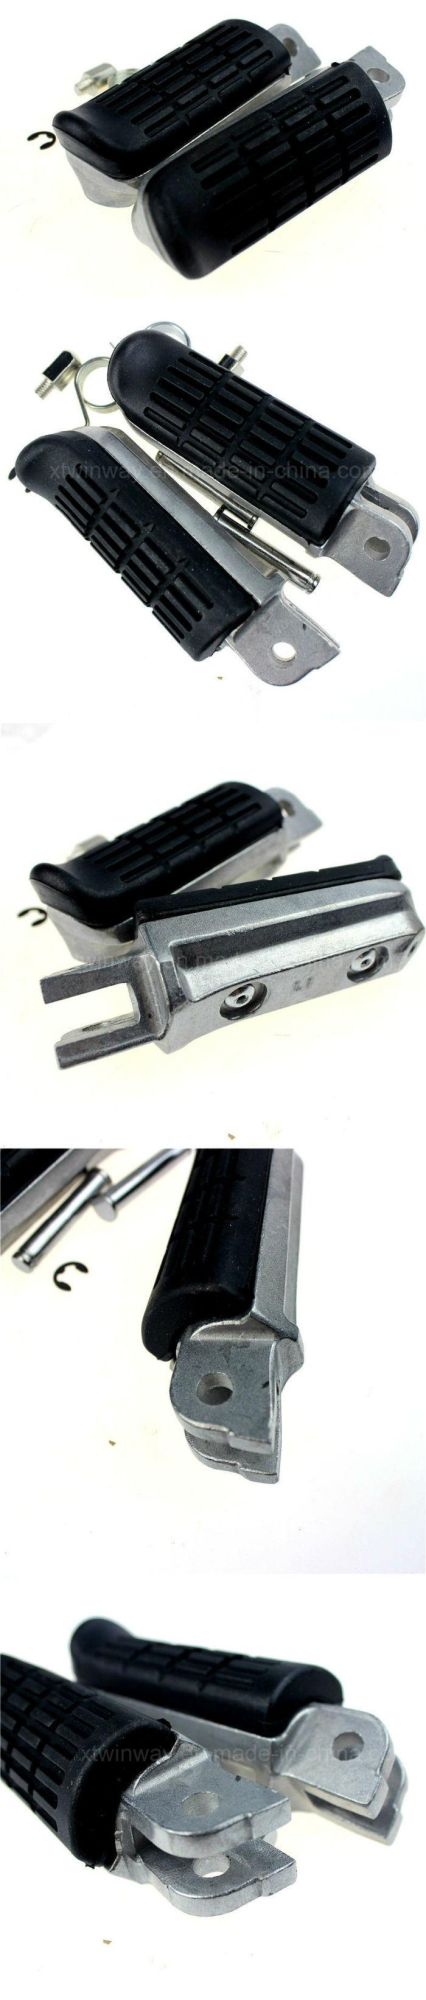 Honda Motorcycle Rubber Footrest Foot Pedal Motorcycle Parts